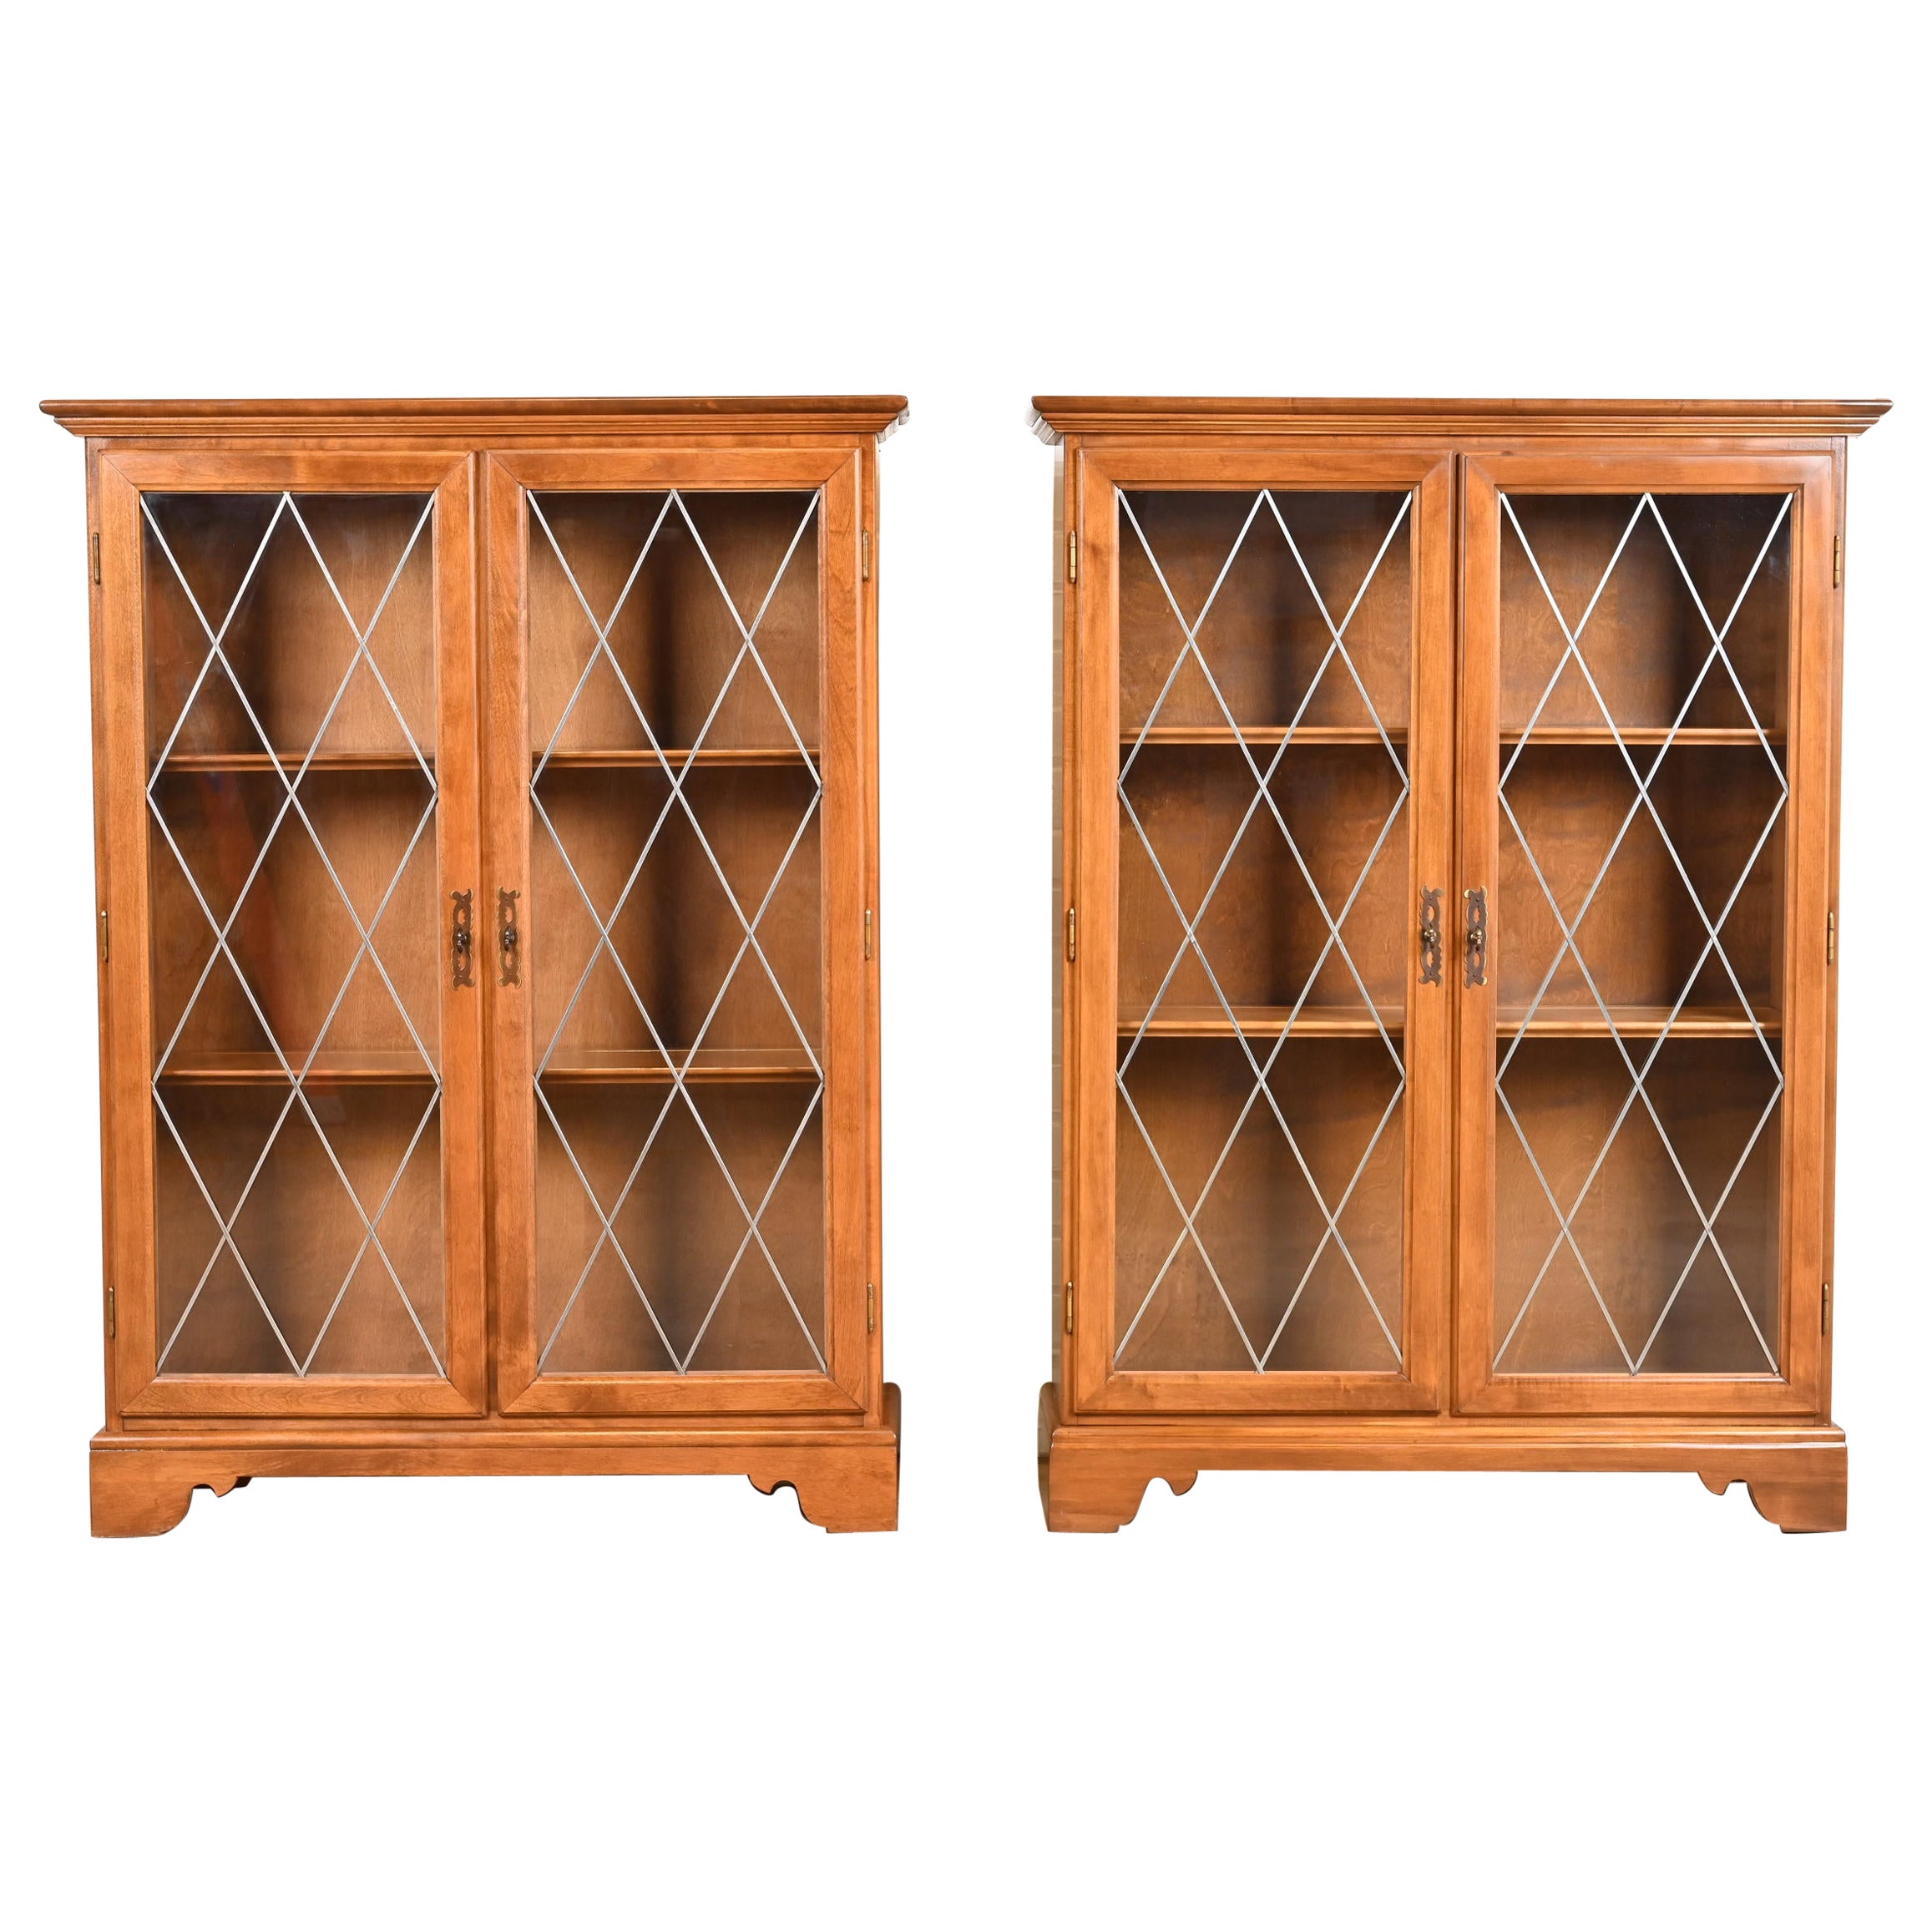 Ethan Allen American Colonial Birch Bookcases, Pair